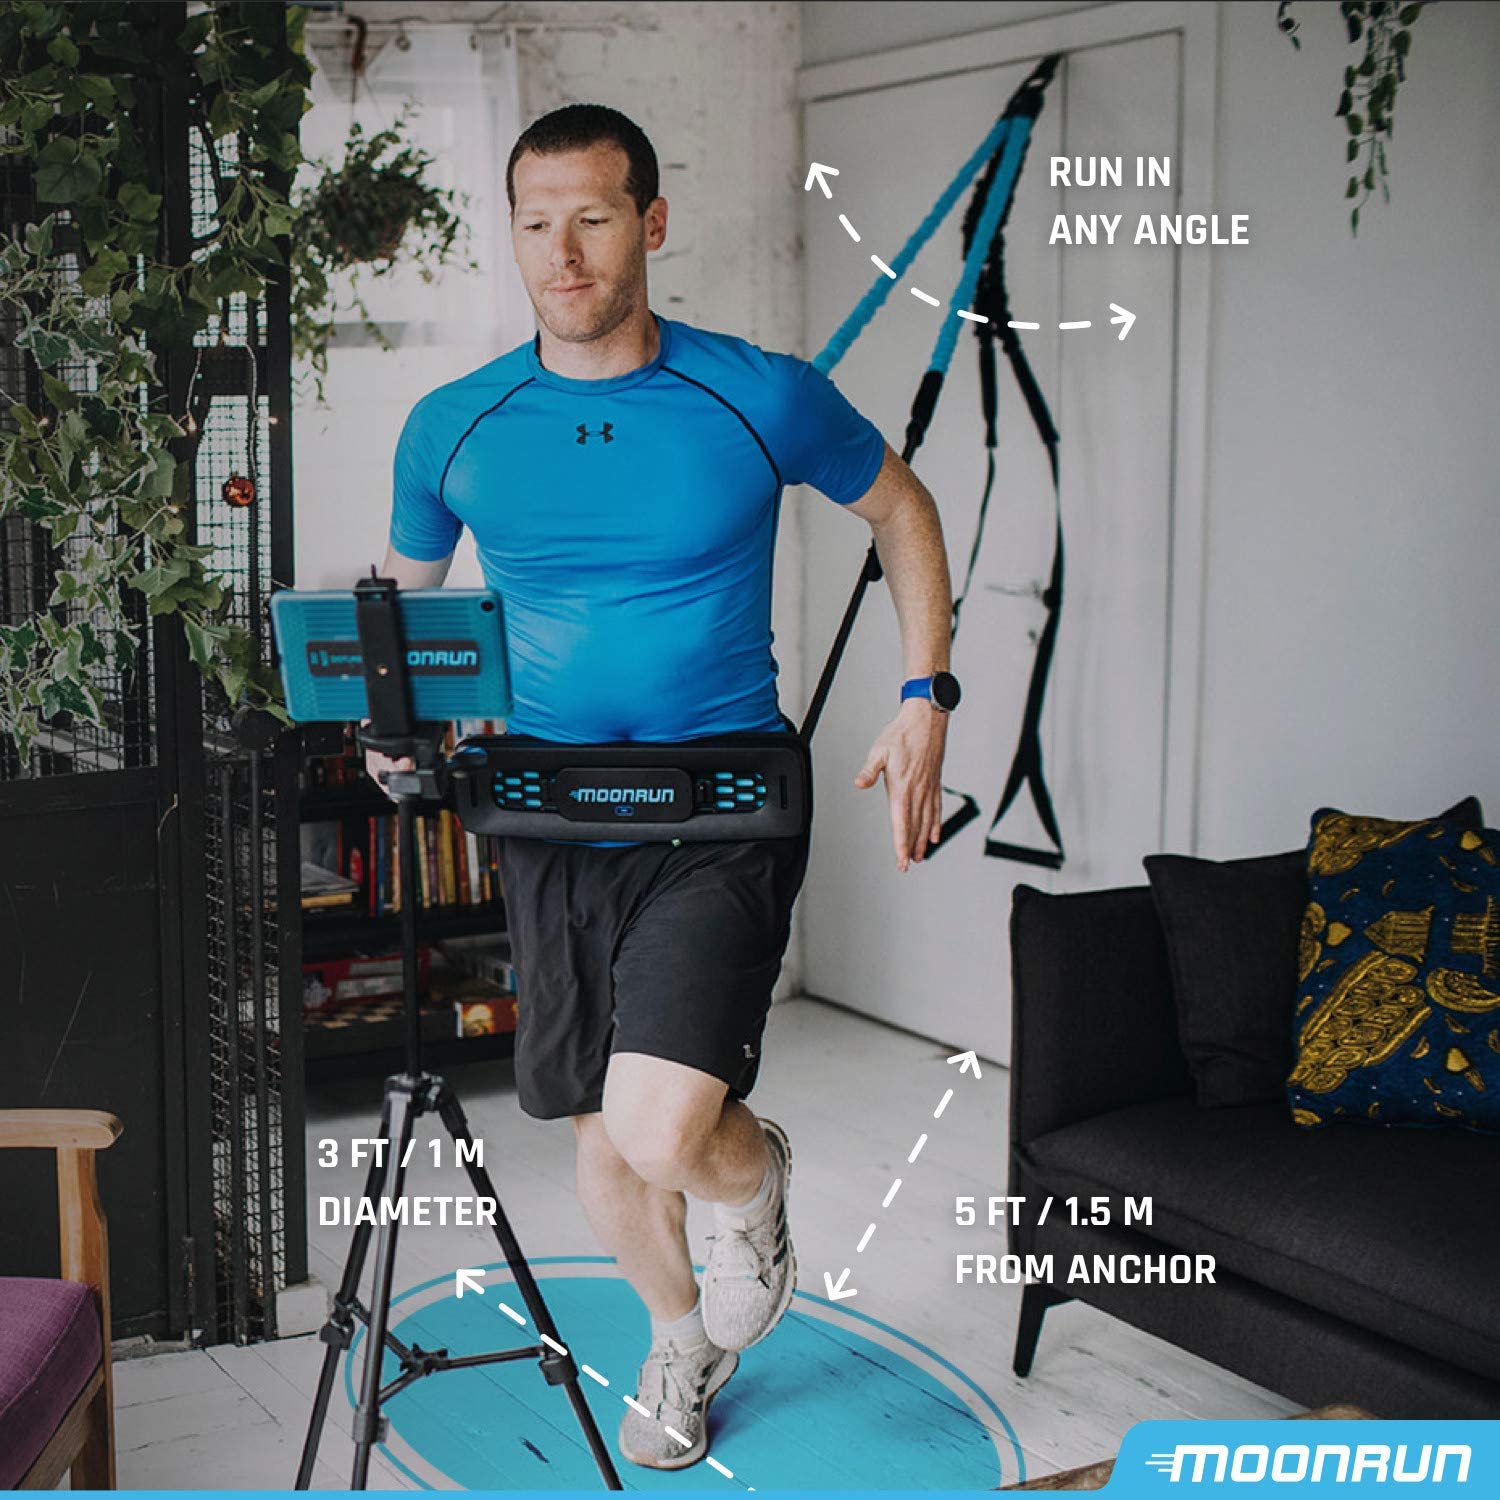 MoonRun Portable Cardio Trainer for Home Workout